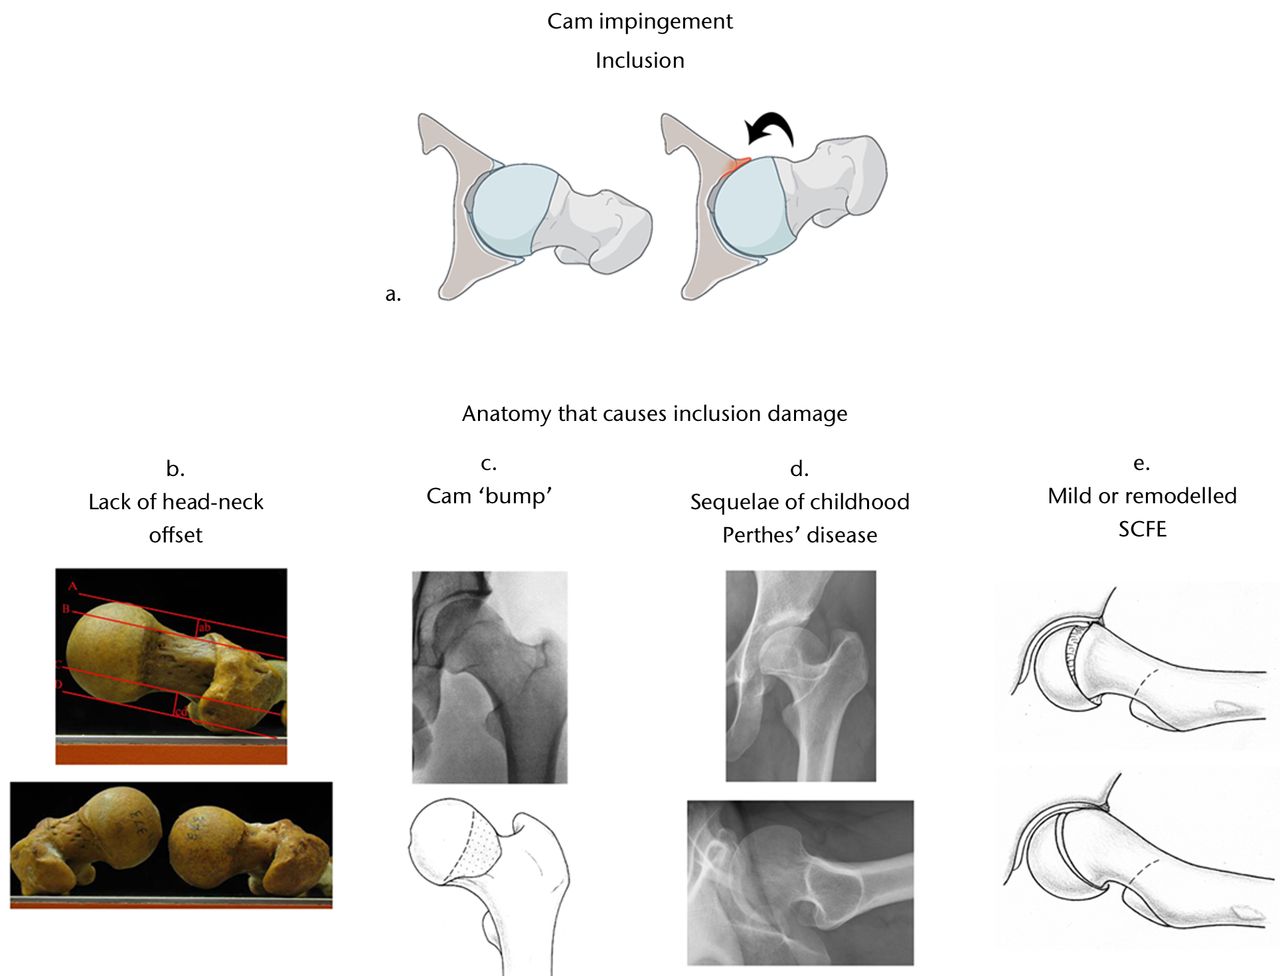 Fig. 1 
        Cam impingement creates an inclusion-type
of injury (a).25 A
bony deformity at the femoral head-neck junction enters the acetabulum
in hip flexion (curved arrow). This causes delamination of the cartilage
and separation at the chondrolabral junction. Many different types
of deformities can cause cam impingement, including a lack of femoral
head-neck offset (b),26 a
cam ‘bump’ (c),27 childhood
Perthes’ disease (d) and both mild and remodelled slipped capital
femoral epiphysis (SCFE) (e)12 (Reprinted
with permission: a) Leunig et al. Femoroacetabular
impingement: diagnosis and management, including open surgical technique. Oper
Tech Sports Med 2007;15:178–188. b) Toogood et al. Proximal
femoral anatomy in the normal human population. Clin Orthop
Relat Res 2009;467:876–885. c) Siebenrock et al. Abnormal
extension of the femoral head as a cause of cam impingement. Clin
Orthop Relat Res 2004;418:54–60. e) Leunig et al. Slipped
capital femoral epiphysis: early mechanical damage to the acetabular
cartilage by a prominent femoral metaphysis. Acta Orthop
Scand 2000;71:370–375).
      